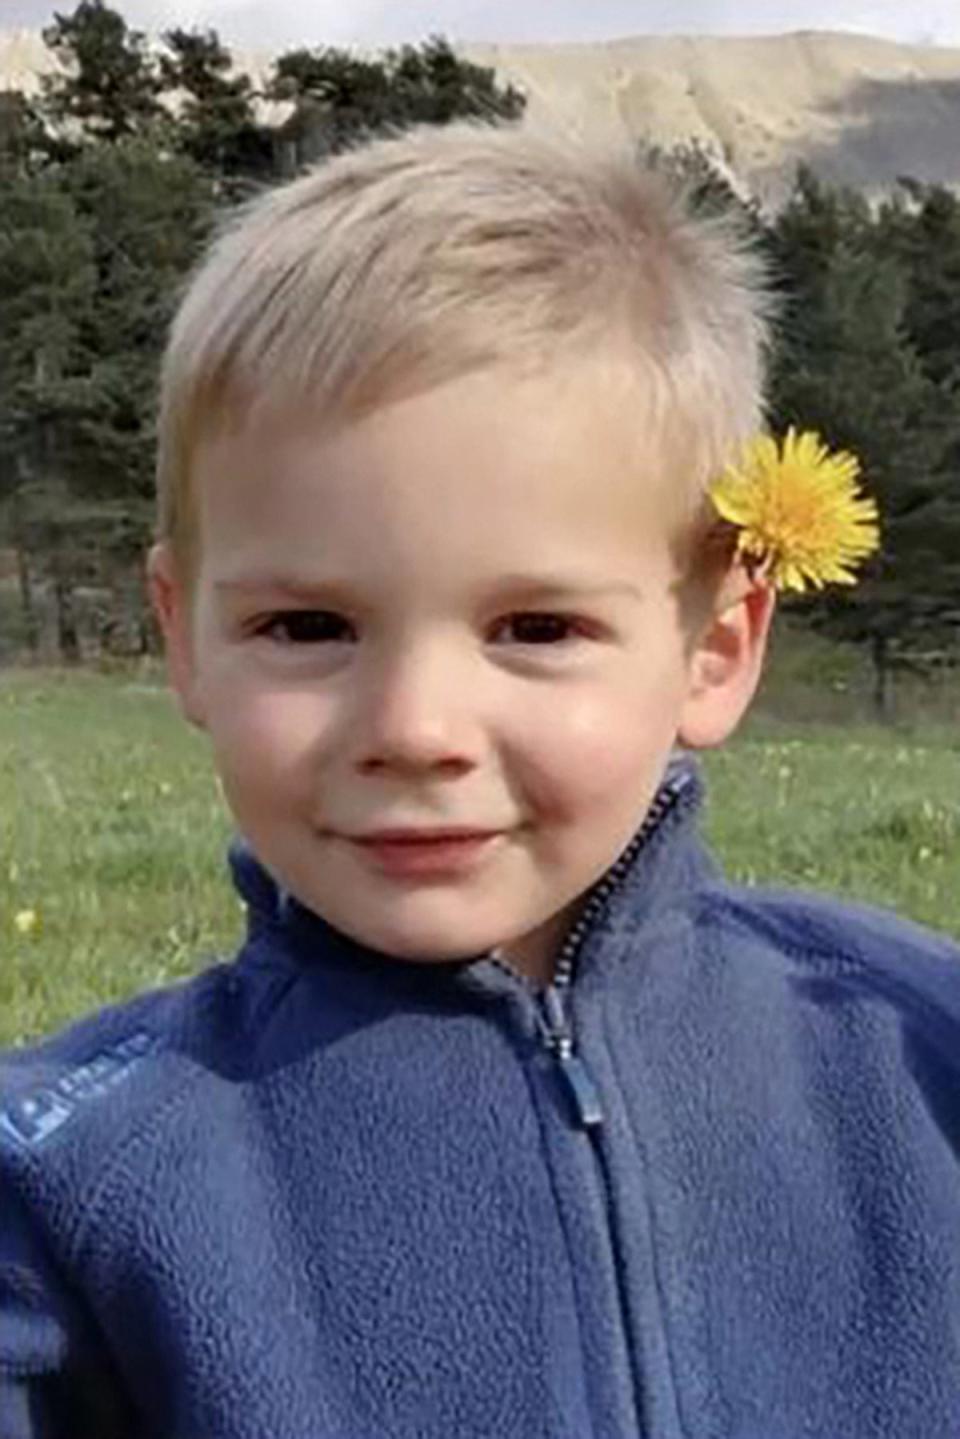 Emile Soleil, 2, disappeared from a family reunion at his grandparents’ house in Le Vernet on 8 July last year (@GendarmerieNationale_Twitter/AF)